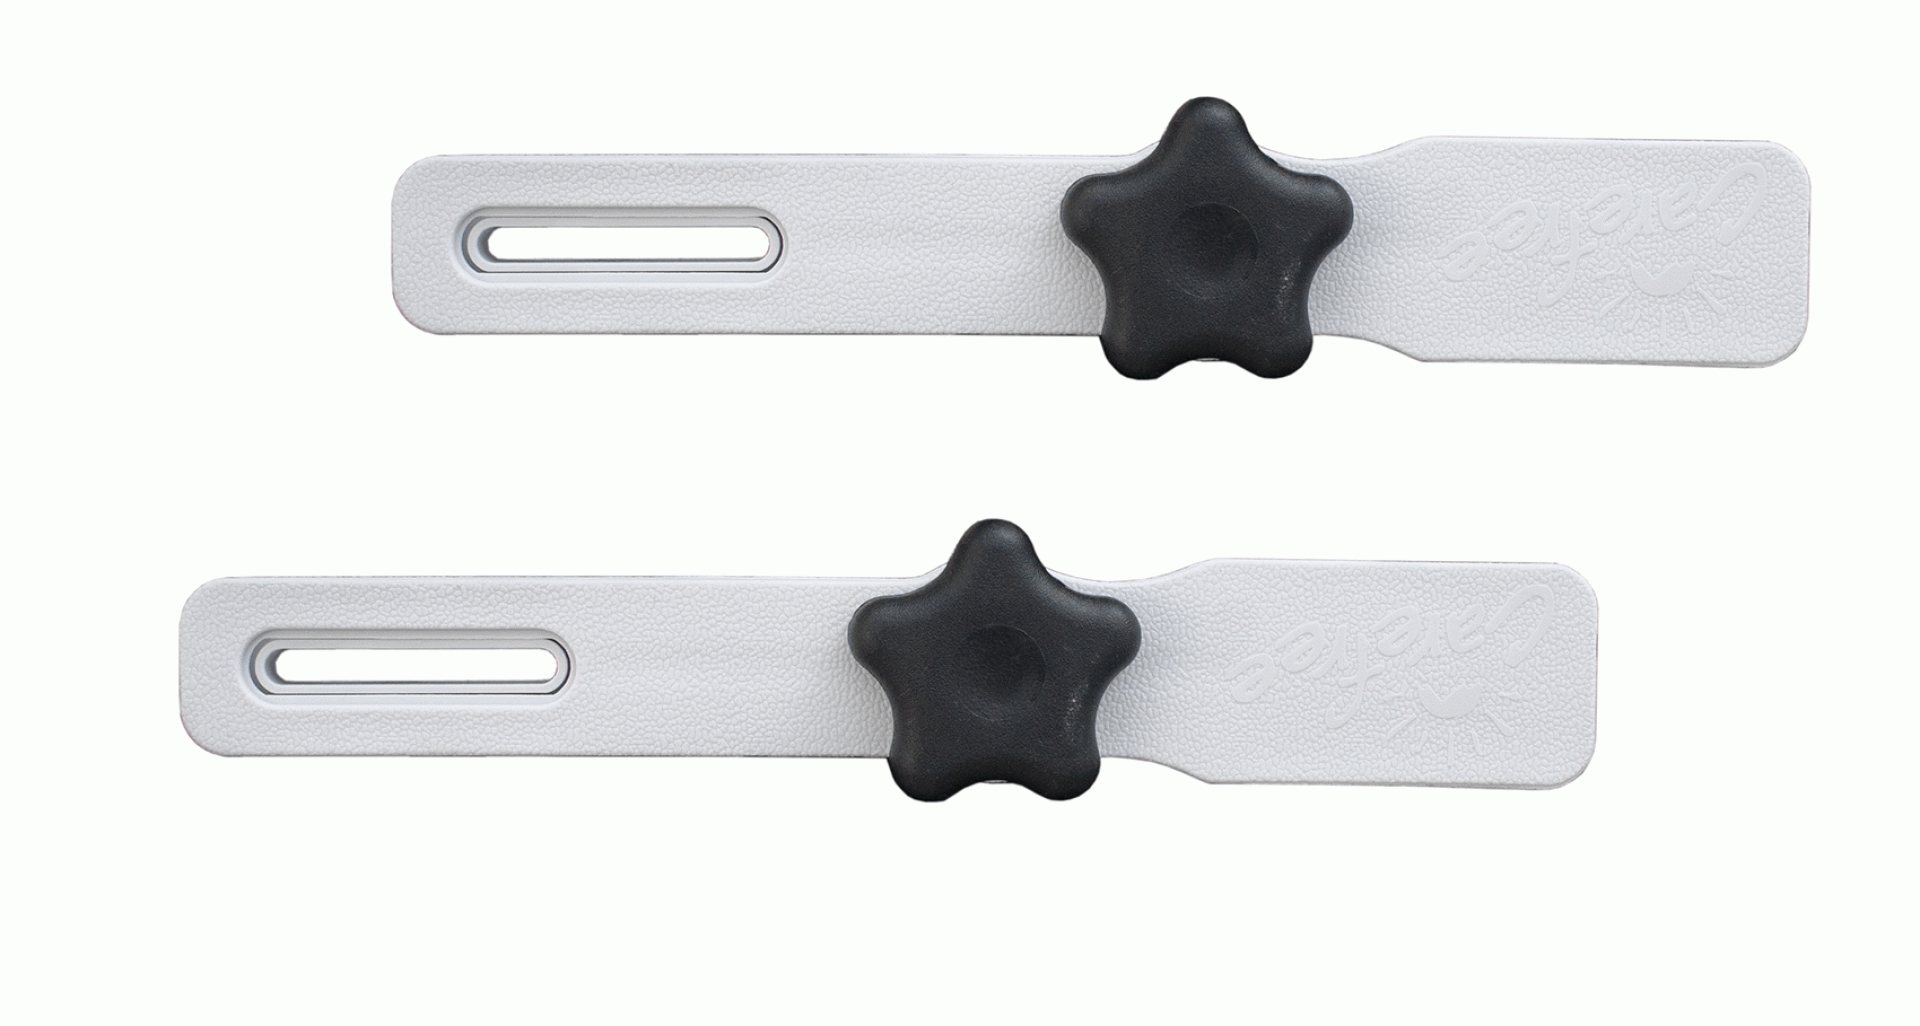 CAREFREE OF COLORADO | R001890 | Canopy Clamp Long - White 2 Pk